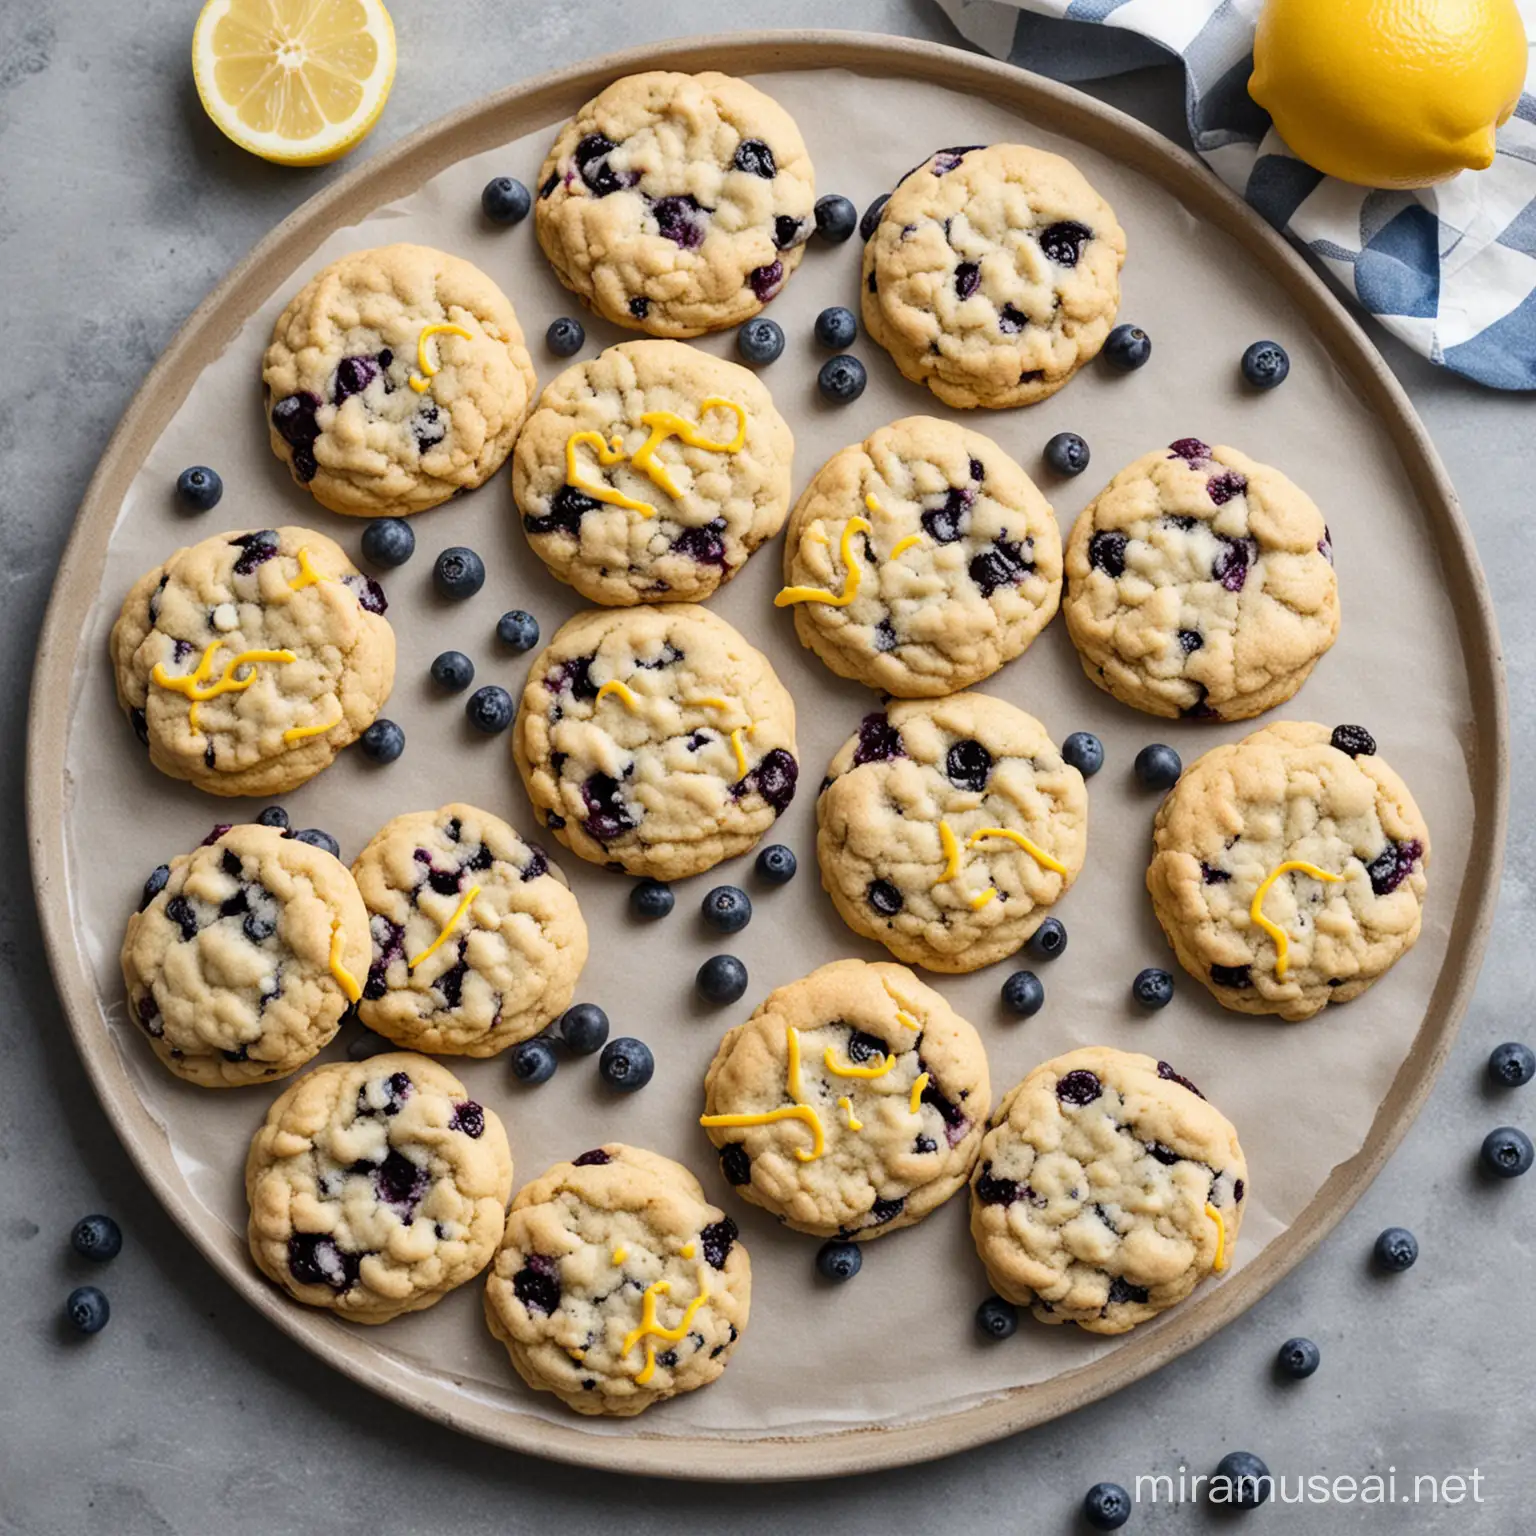 Delicious Lemon and Blueberry Cookies Freshly Baked Treats for a Sweet Delight